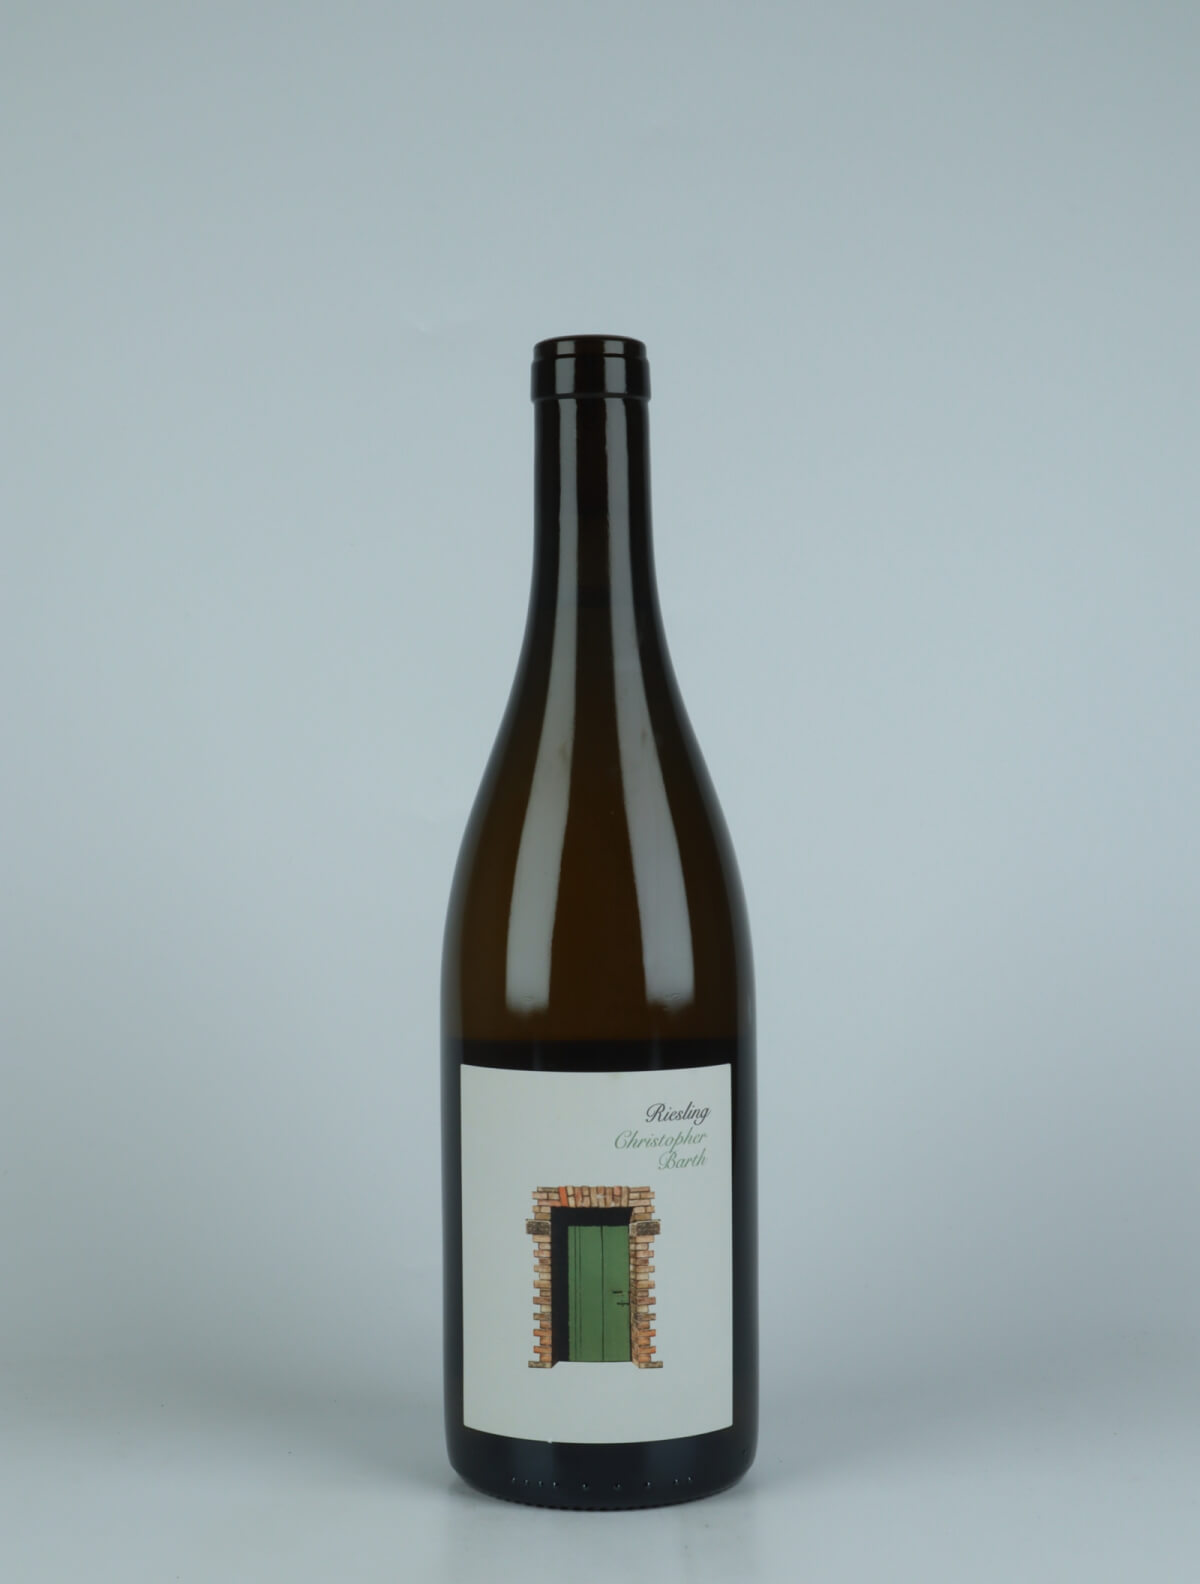 A bottle 2021 Riesling White wine from Christopher Barth, Rheinhessen in Germany